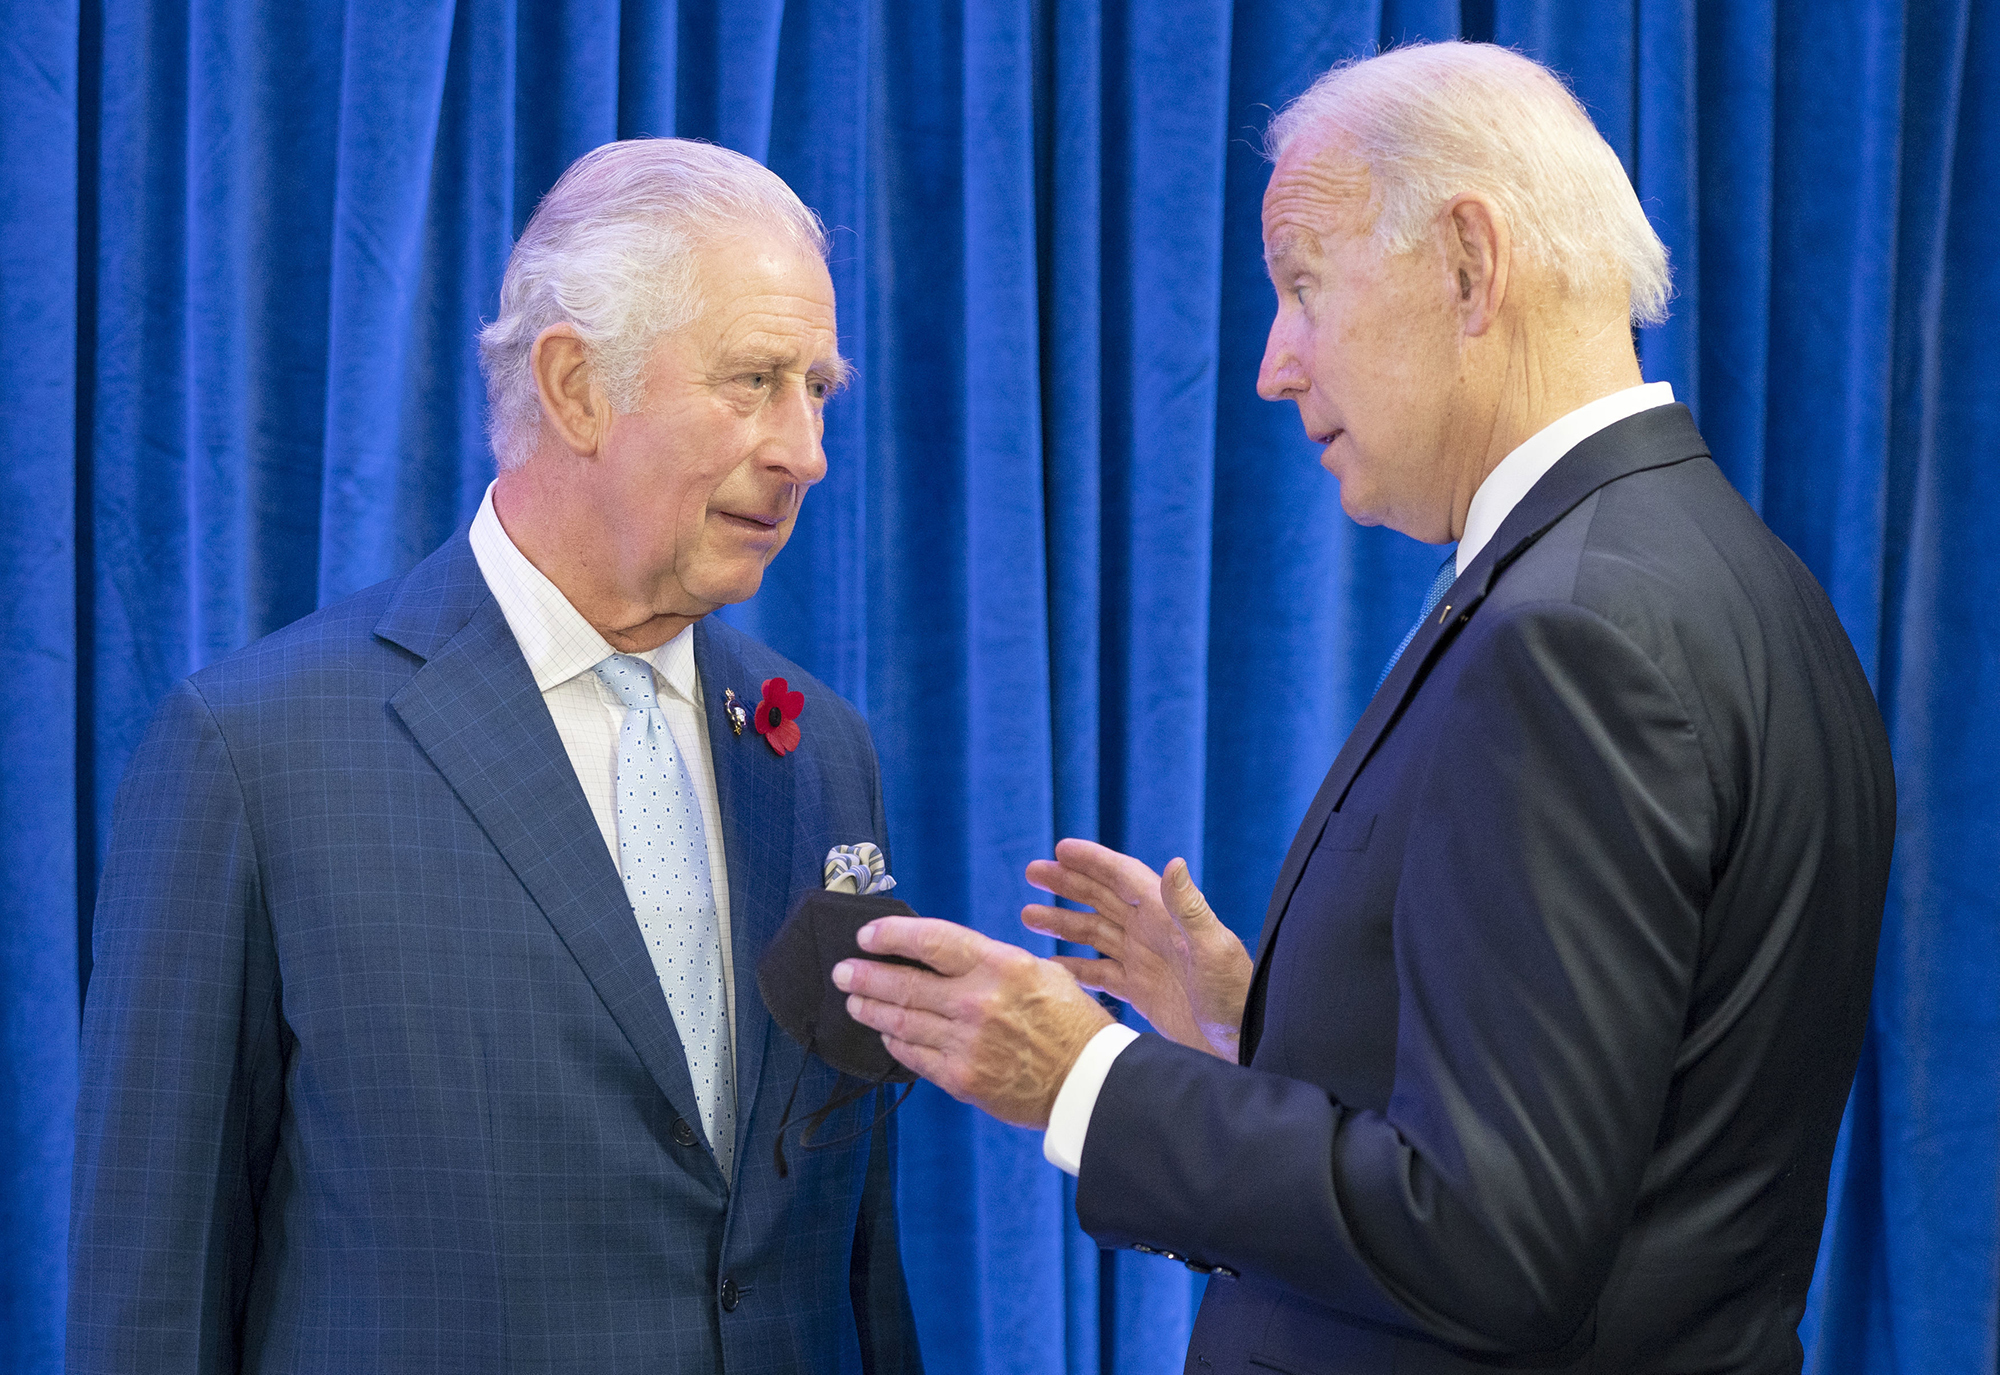 Britain's Prince Charles, left, greets U.S. President Joe Biden ahead of their bilateral meeting during the Cop26 summit at the Scottish Event Campus in Glasgow, Scotland, Tuesday, Nov. 2, 2021. 